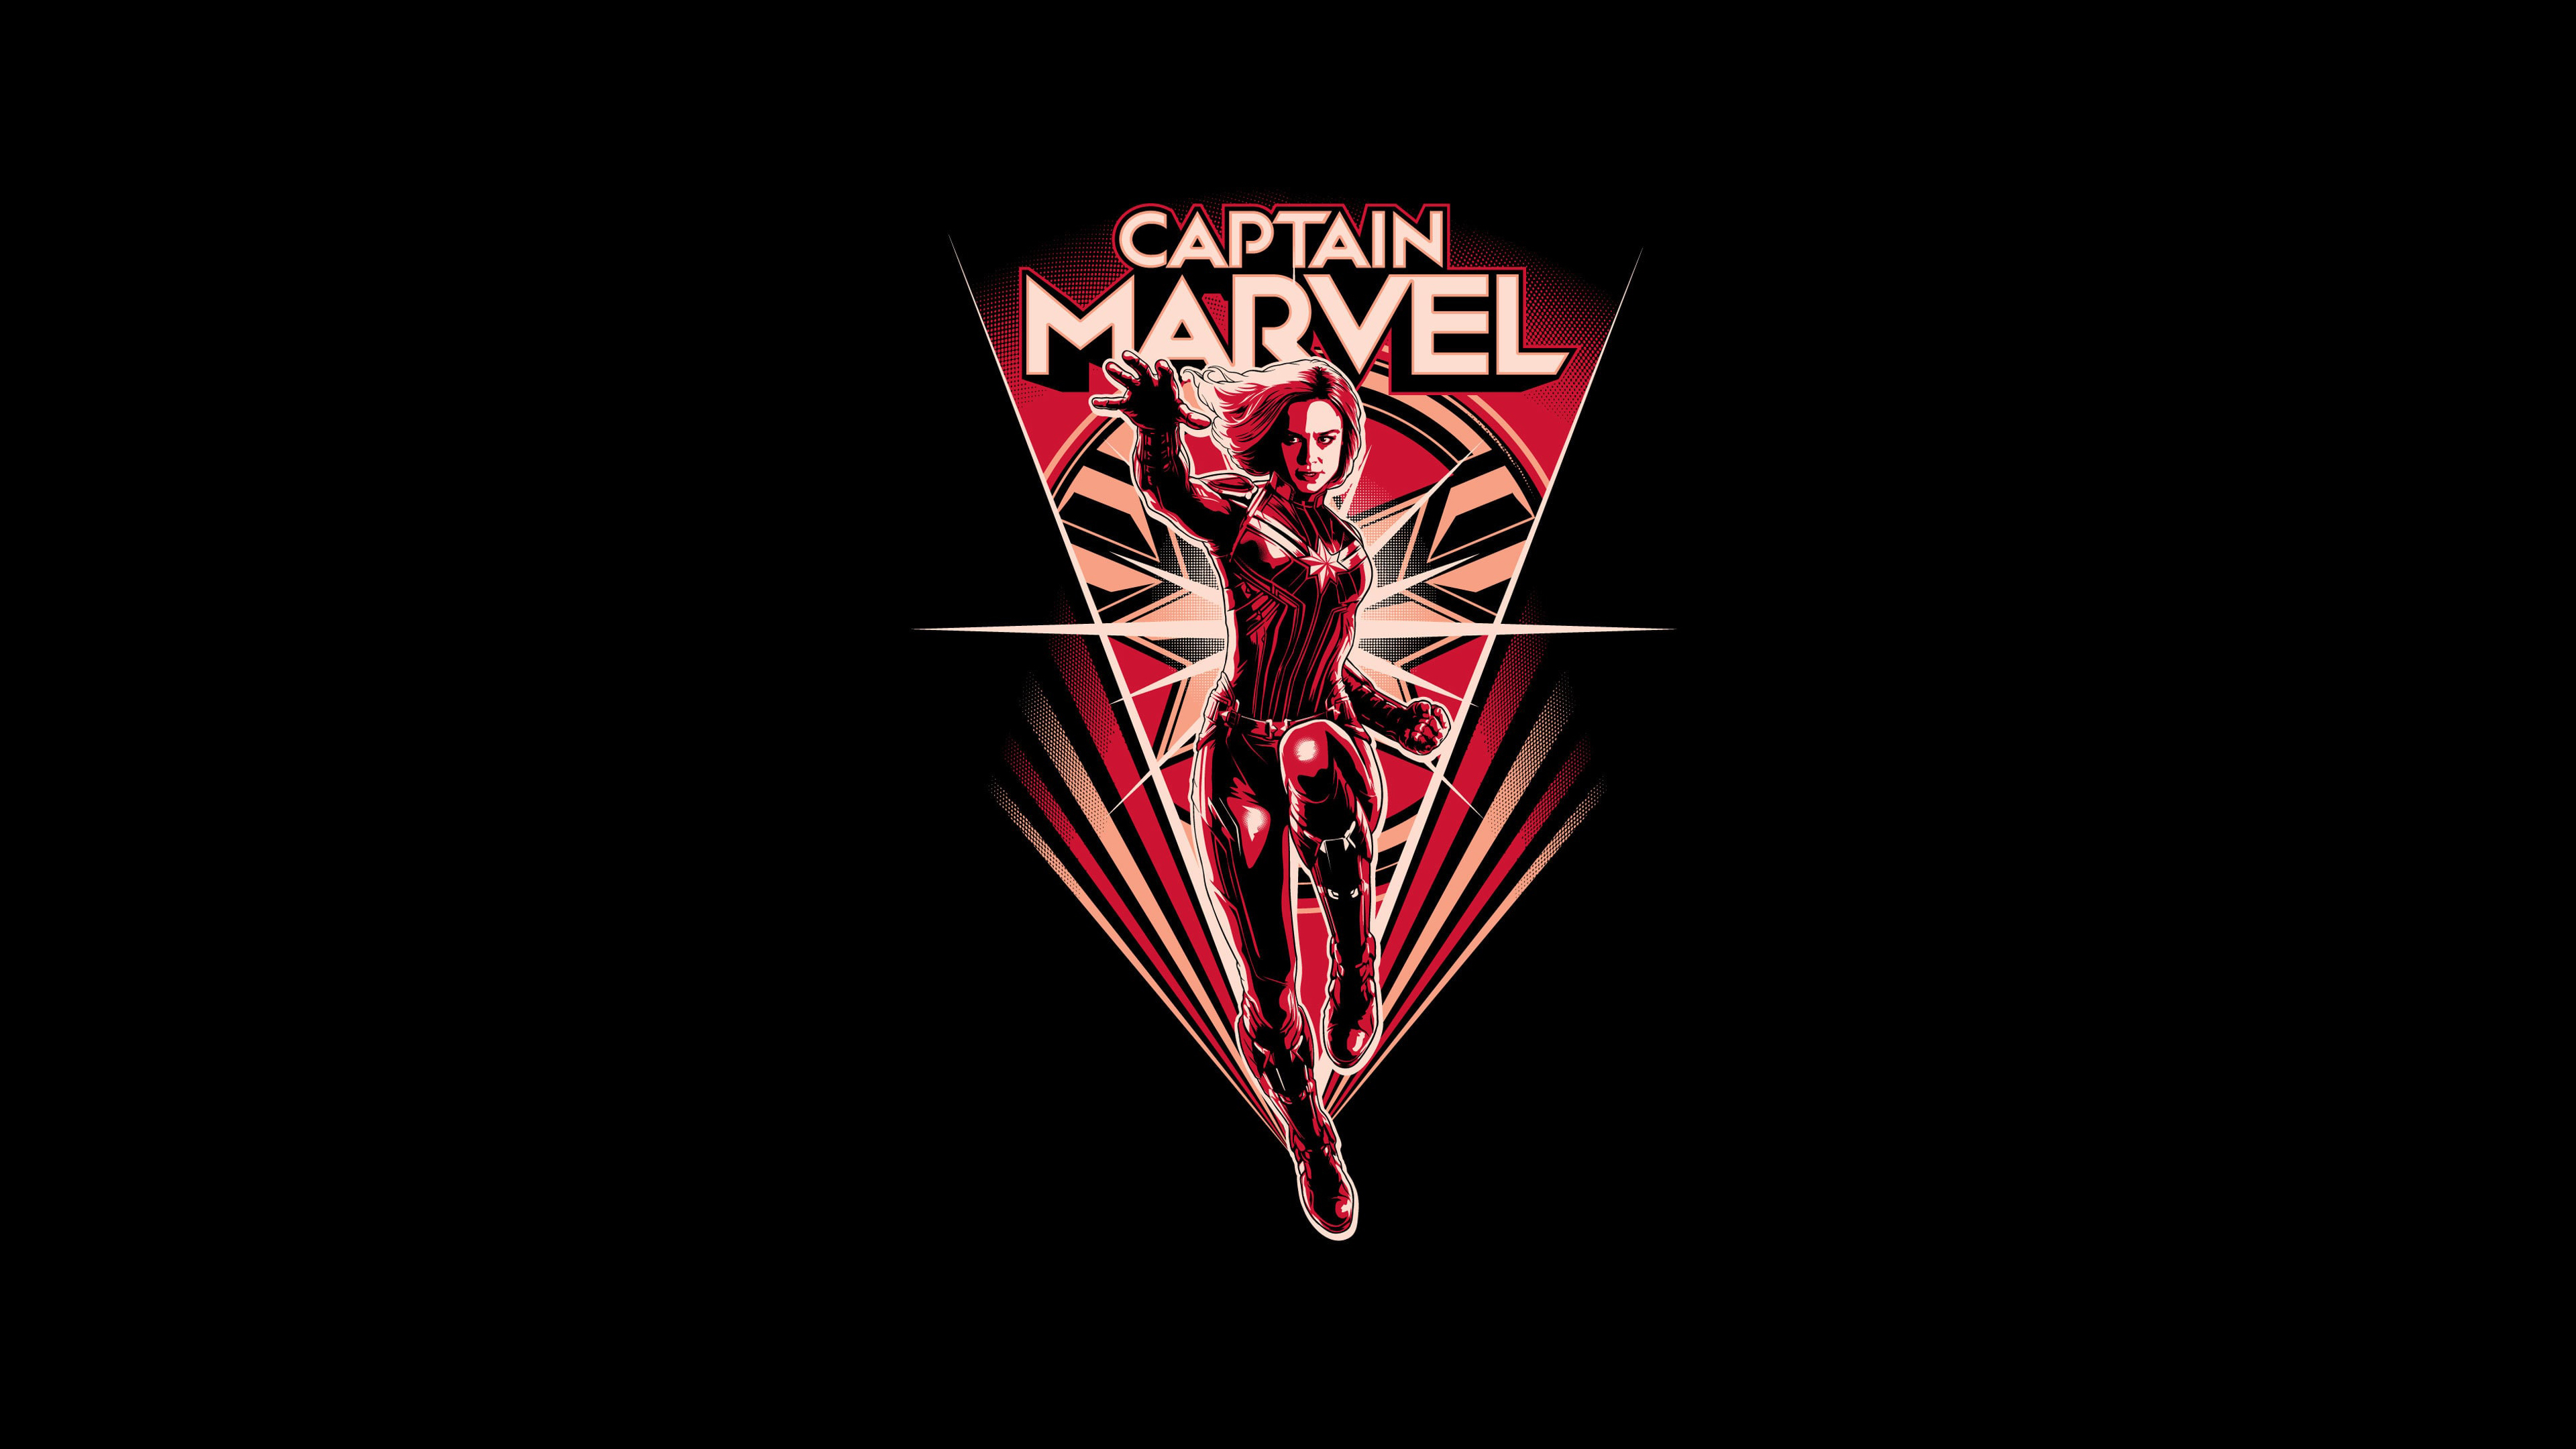 1920x10802019410 Minimal Captain Marvel 1920x10802019410 Resolution  Wallpaper, HD Movies 4K Wallpapers, Images, Photos and Background -  Wallpapers Den